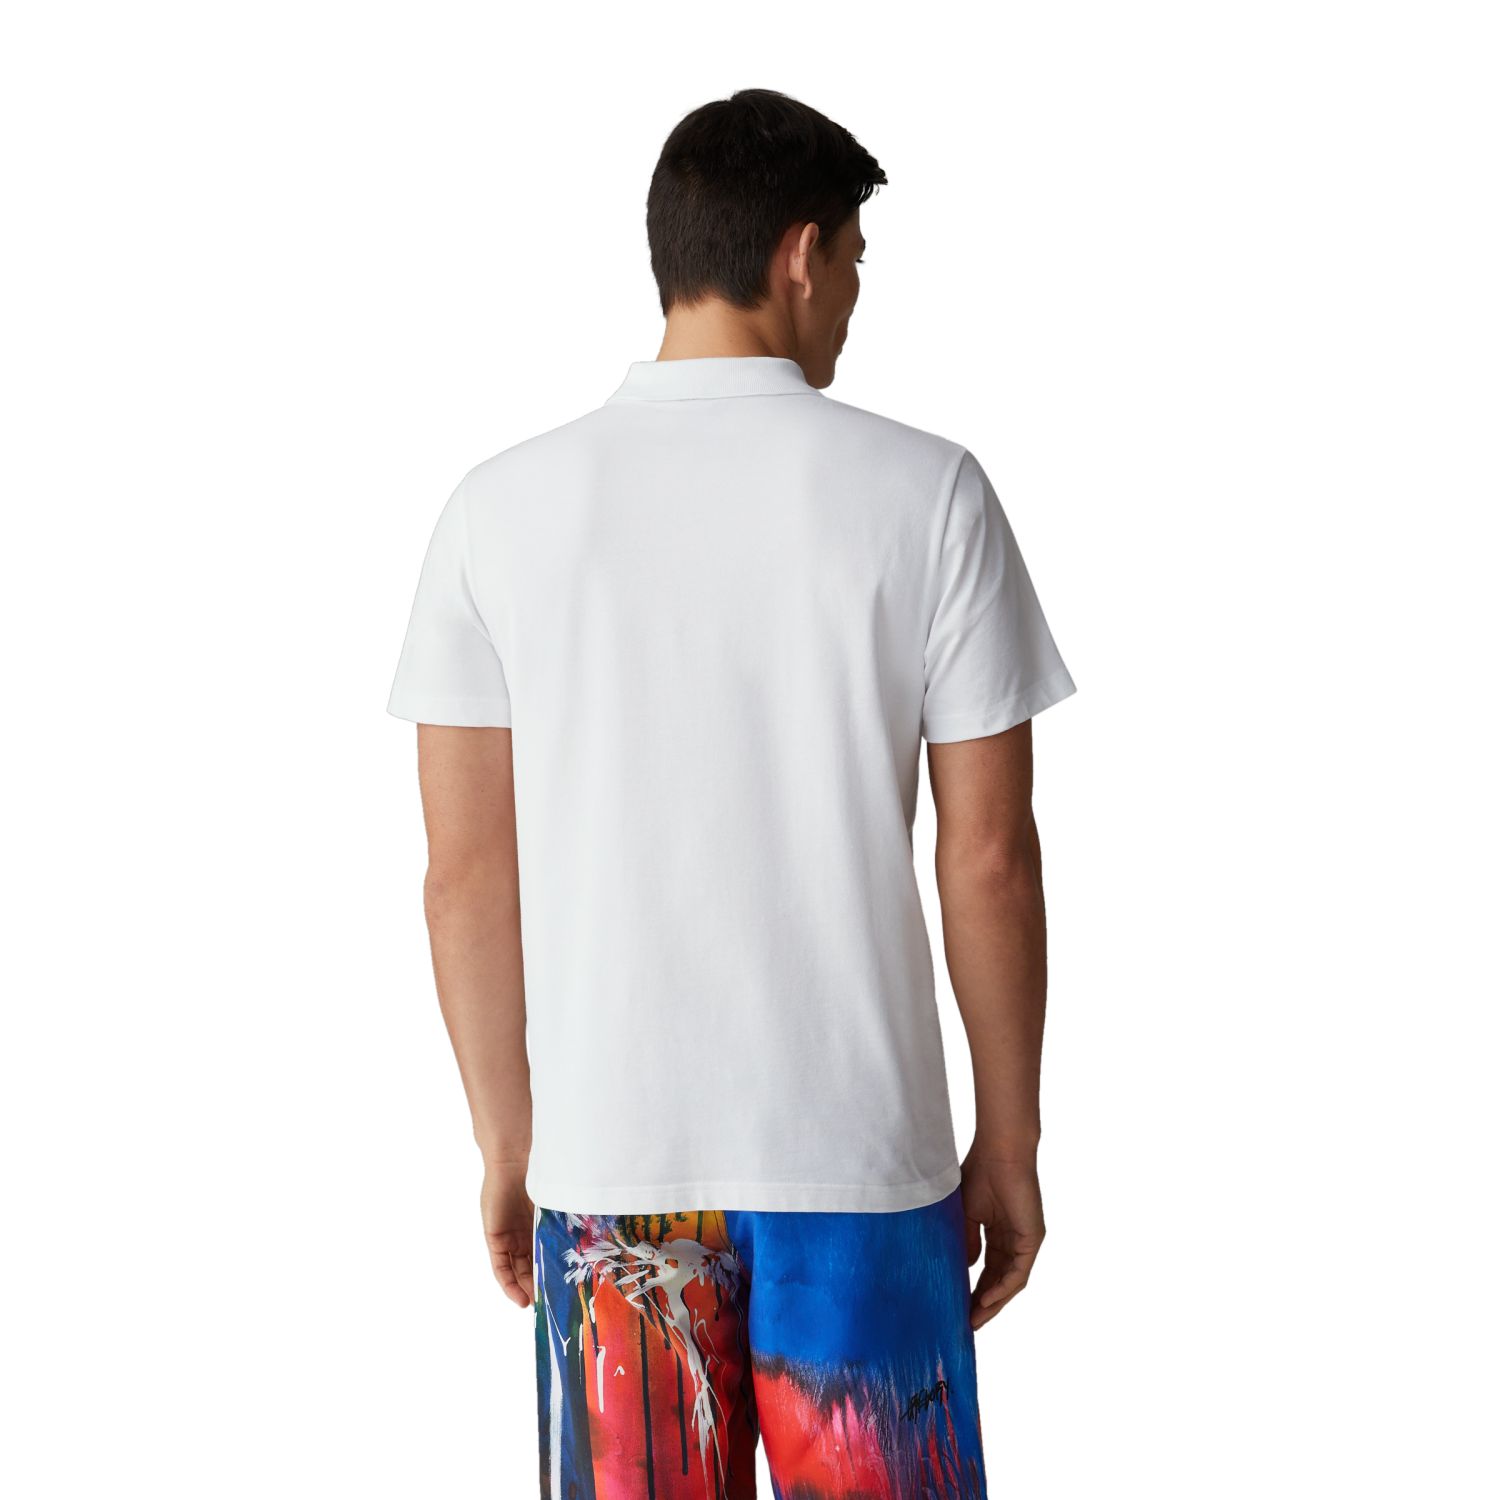 T-Shirts & Polo -  bogner fire and ice RAMON Polo Shirt